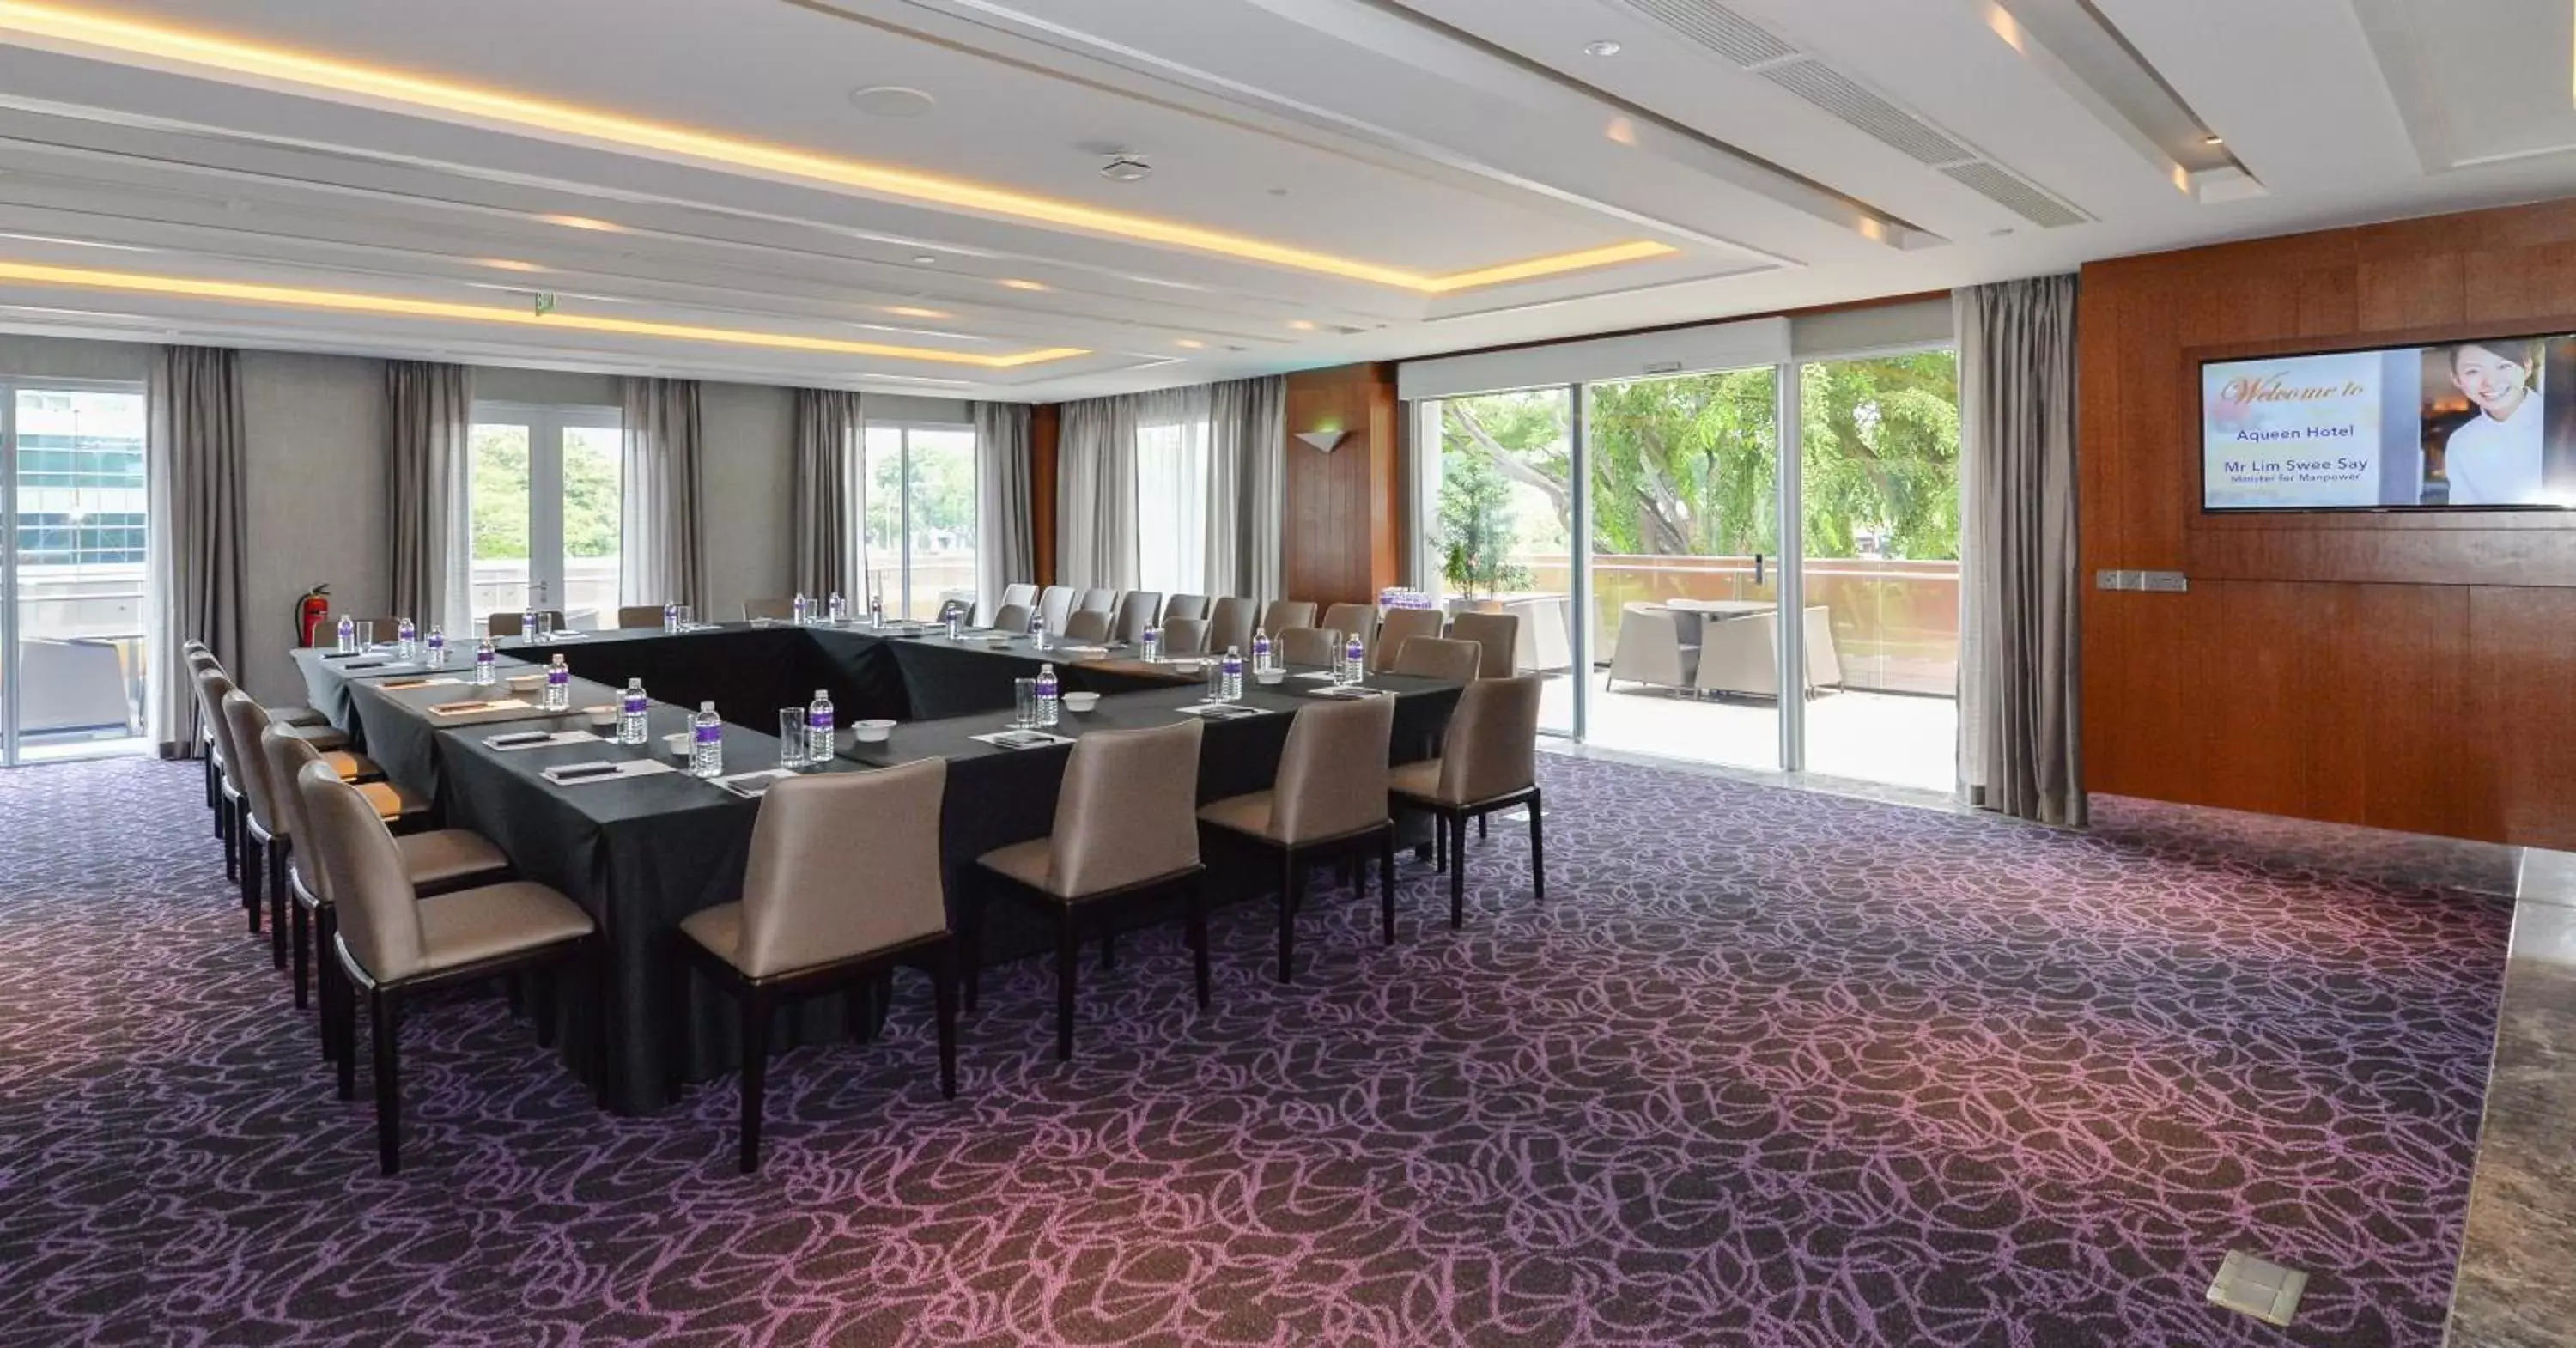 Meeting/conference room, Business Area/Conference Room in Aqueen Hotel Paya Lebar